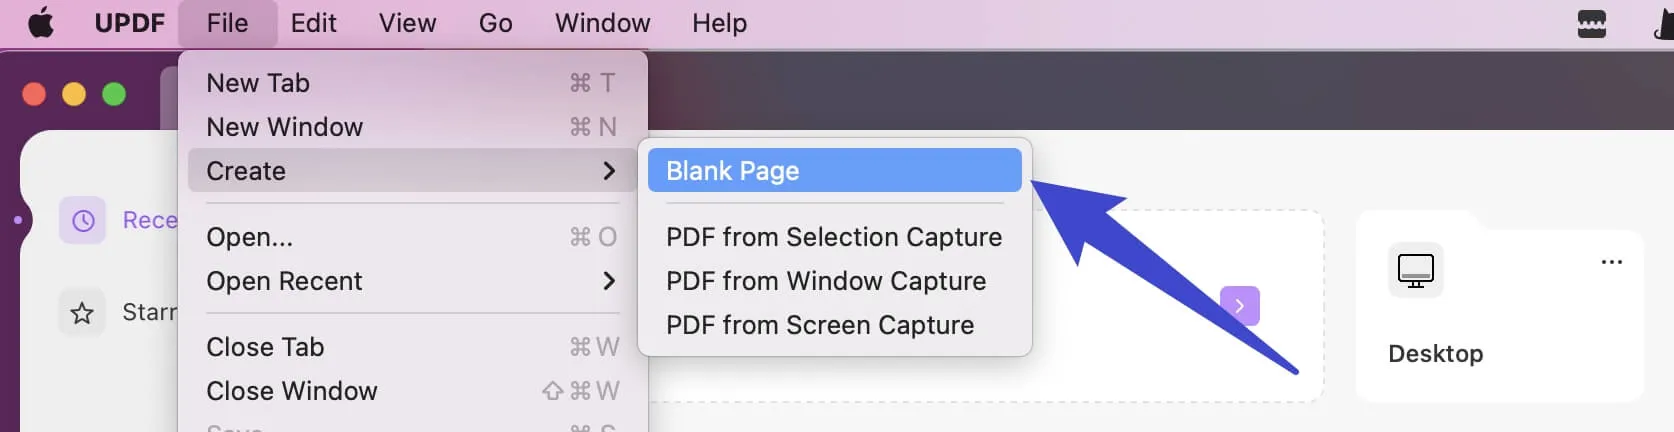 mac preview combine images into pdf with updf